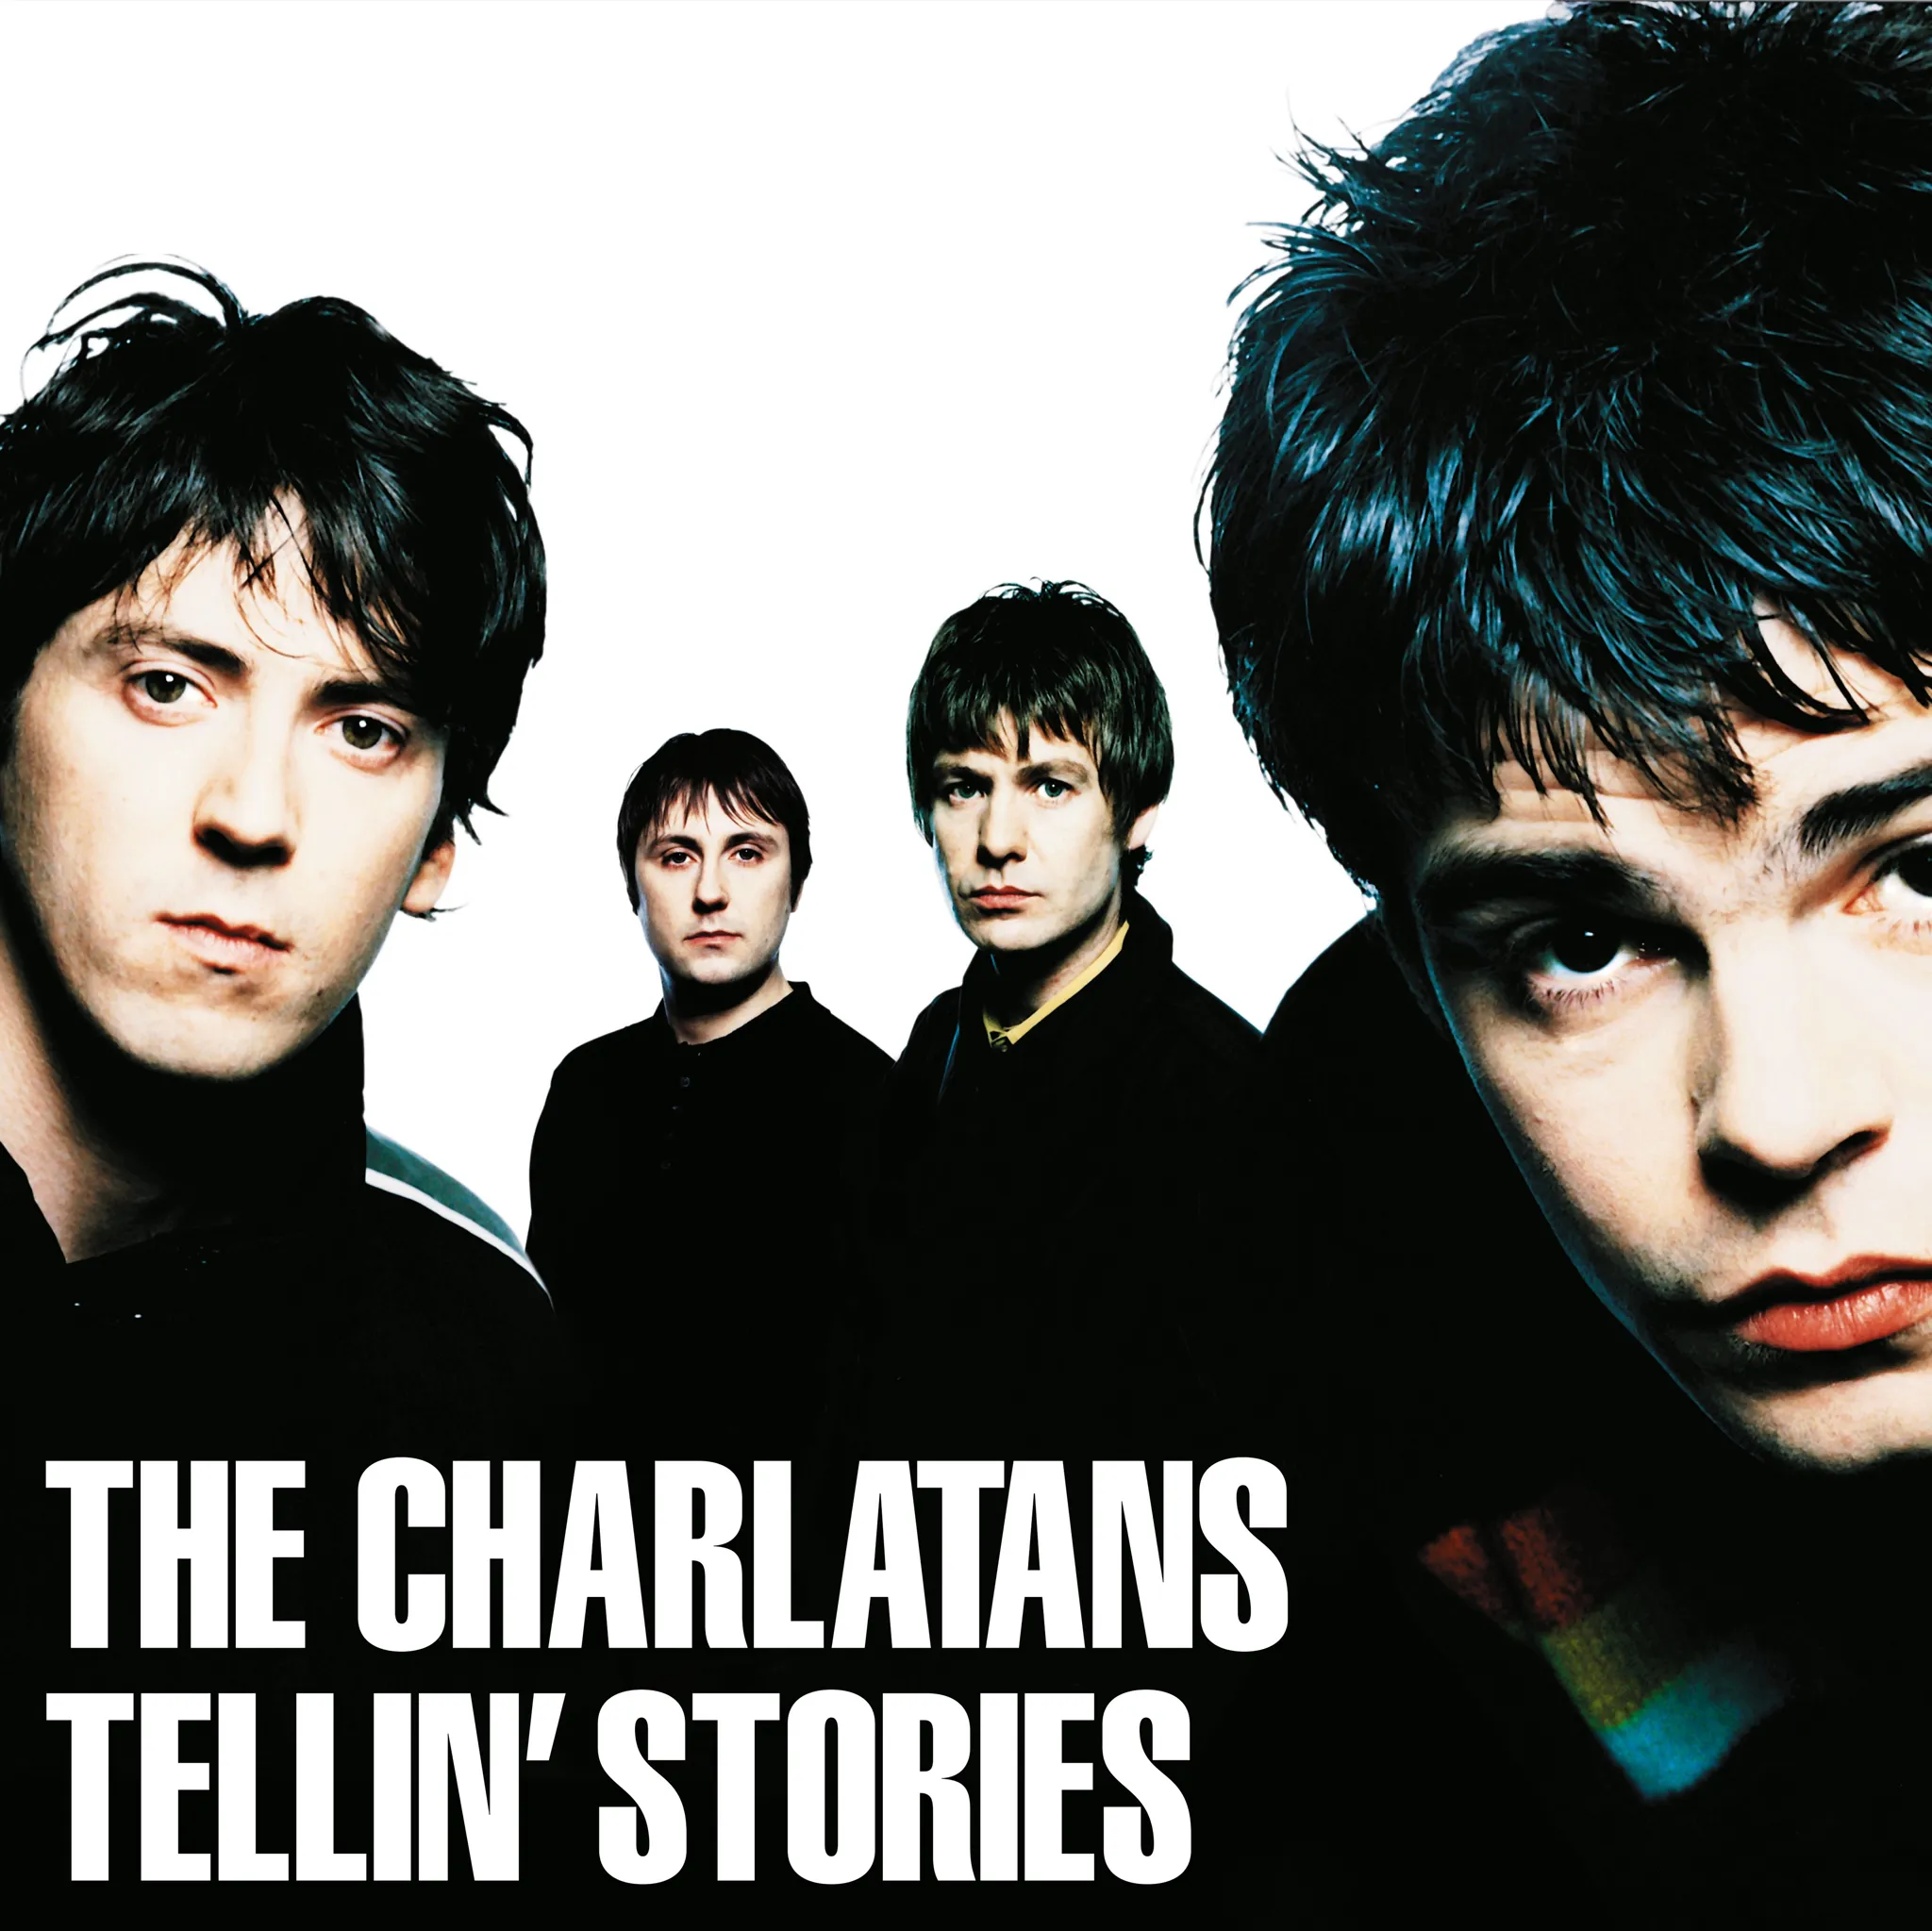 <strong>The Charlatans - Tellin' Stories</strong> (Vinyl LP)